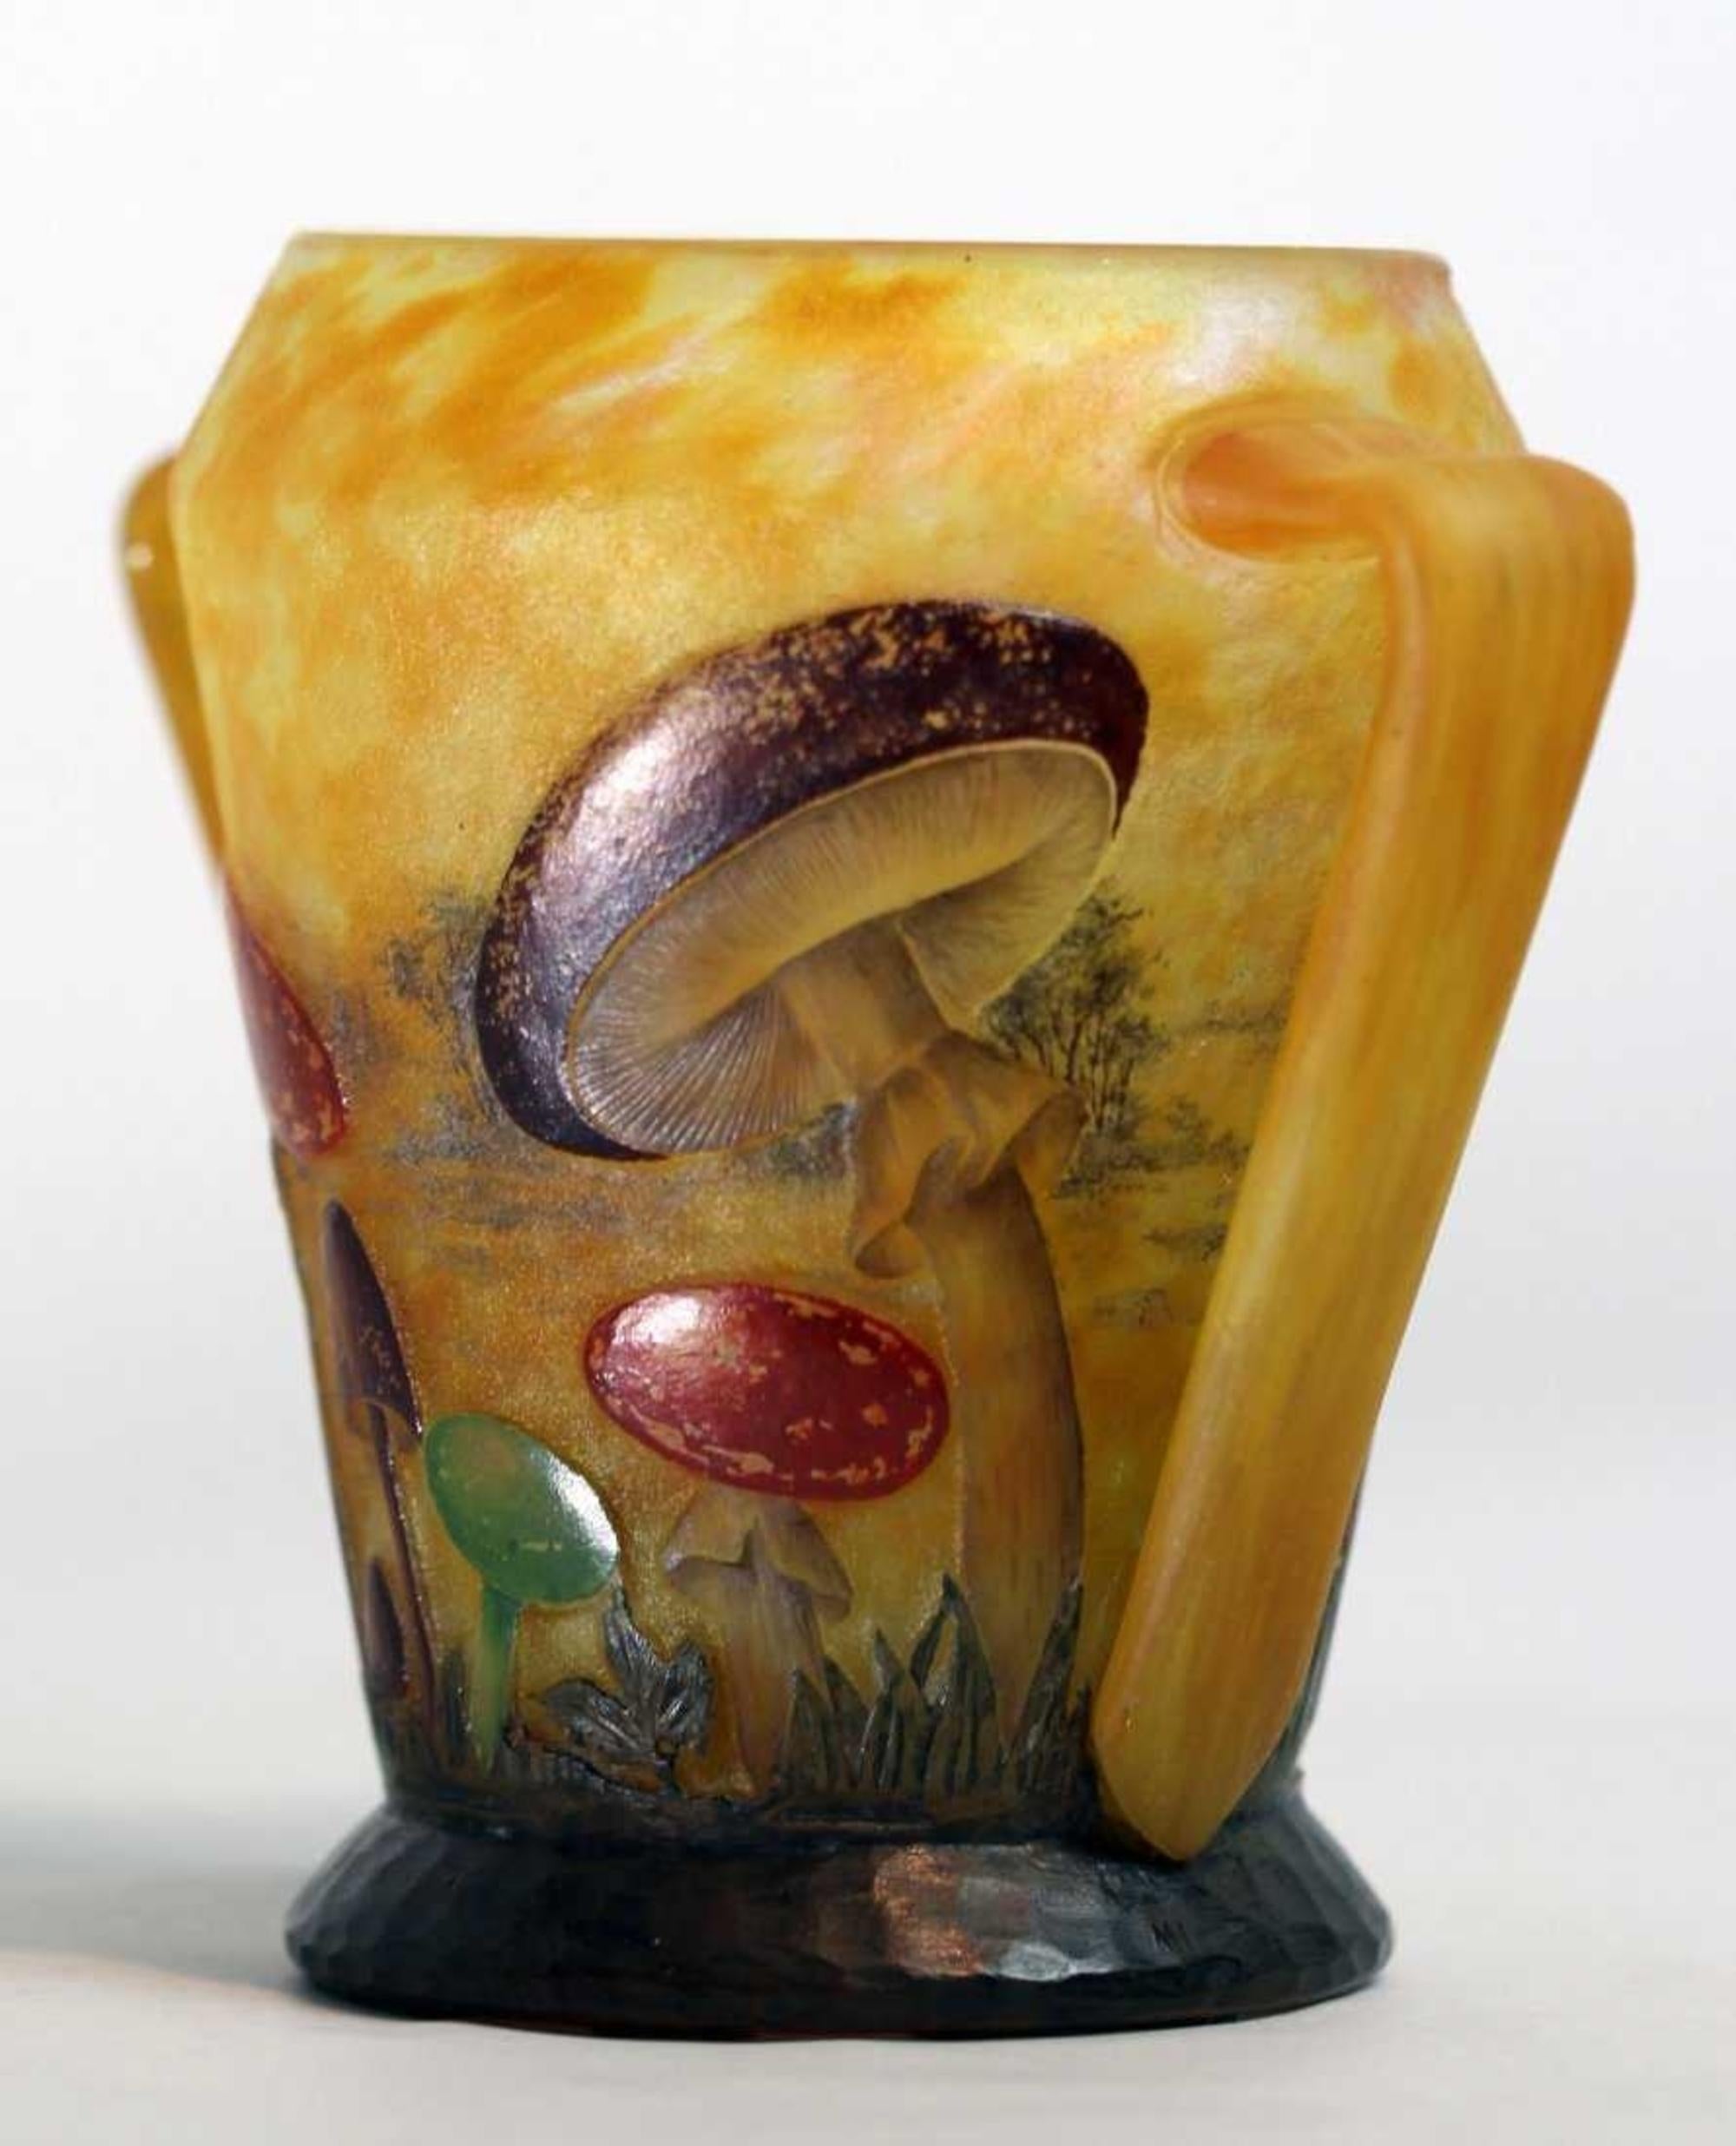 Daum enameled cameo glass two handled “Mushroom” vase,
circa 1900. 
Signed Daum Nancy. 

Measure: Height 5.9 inches.
Condition
Very good condition.